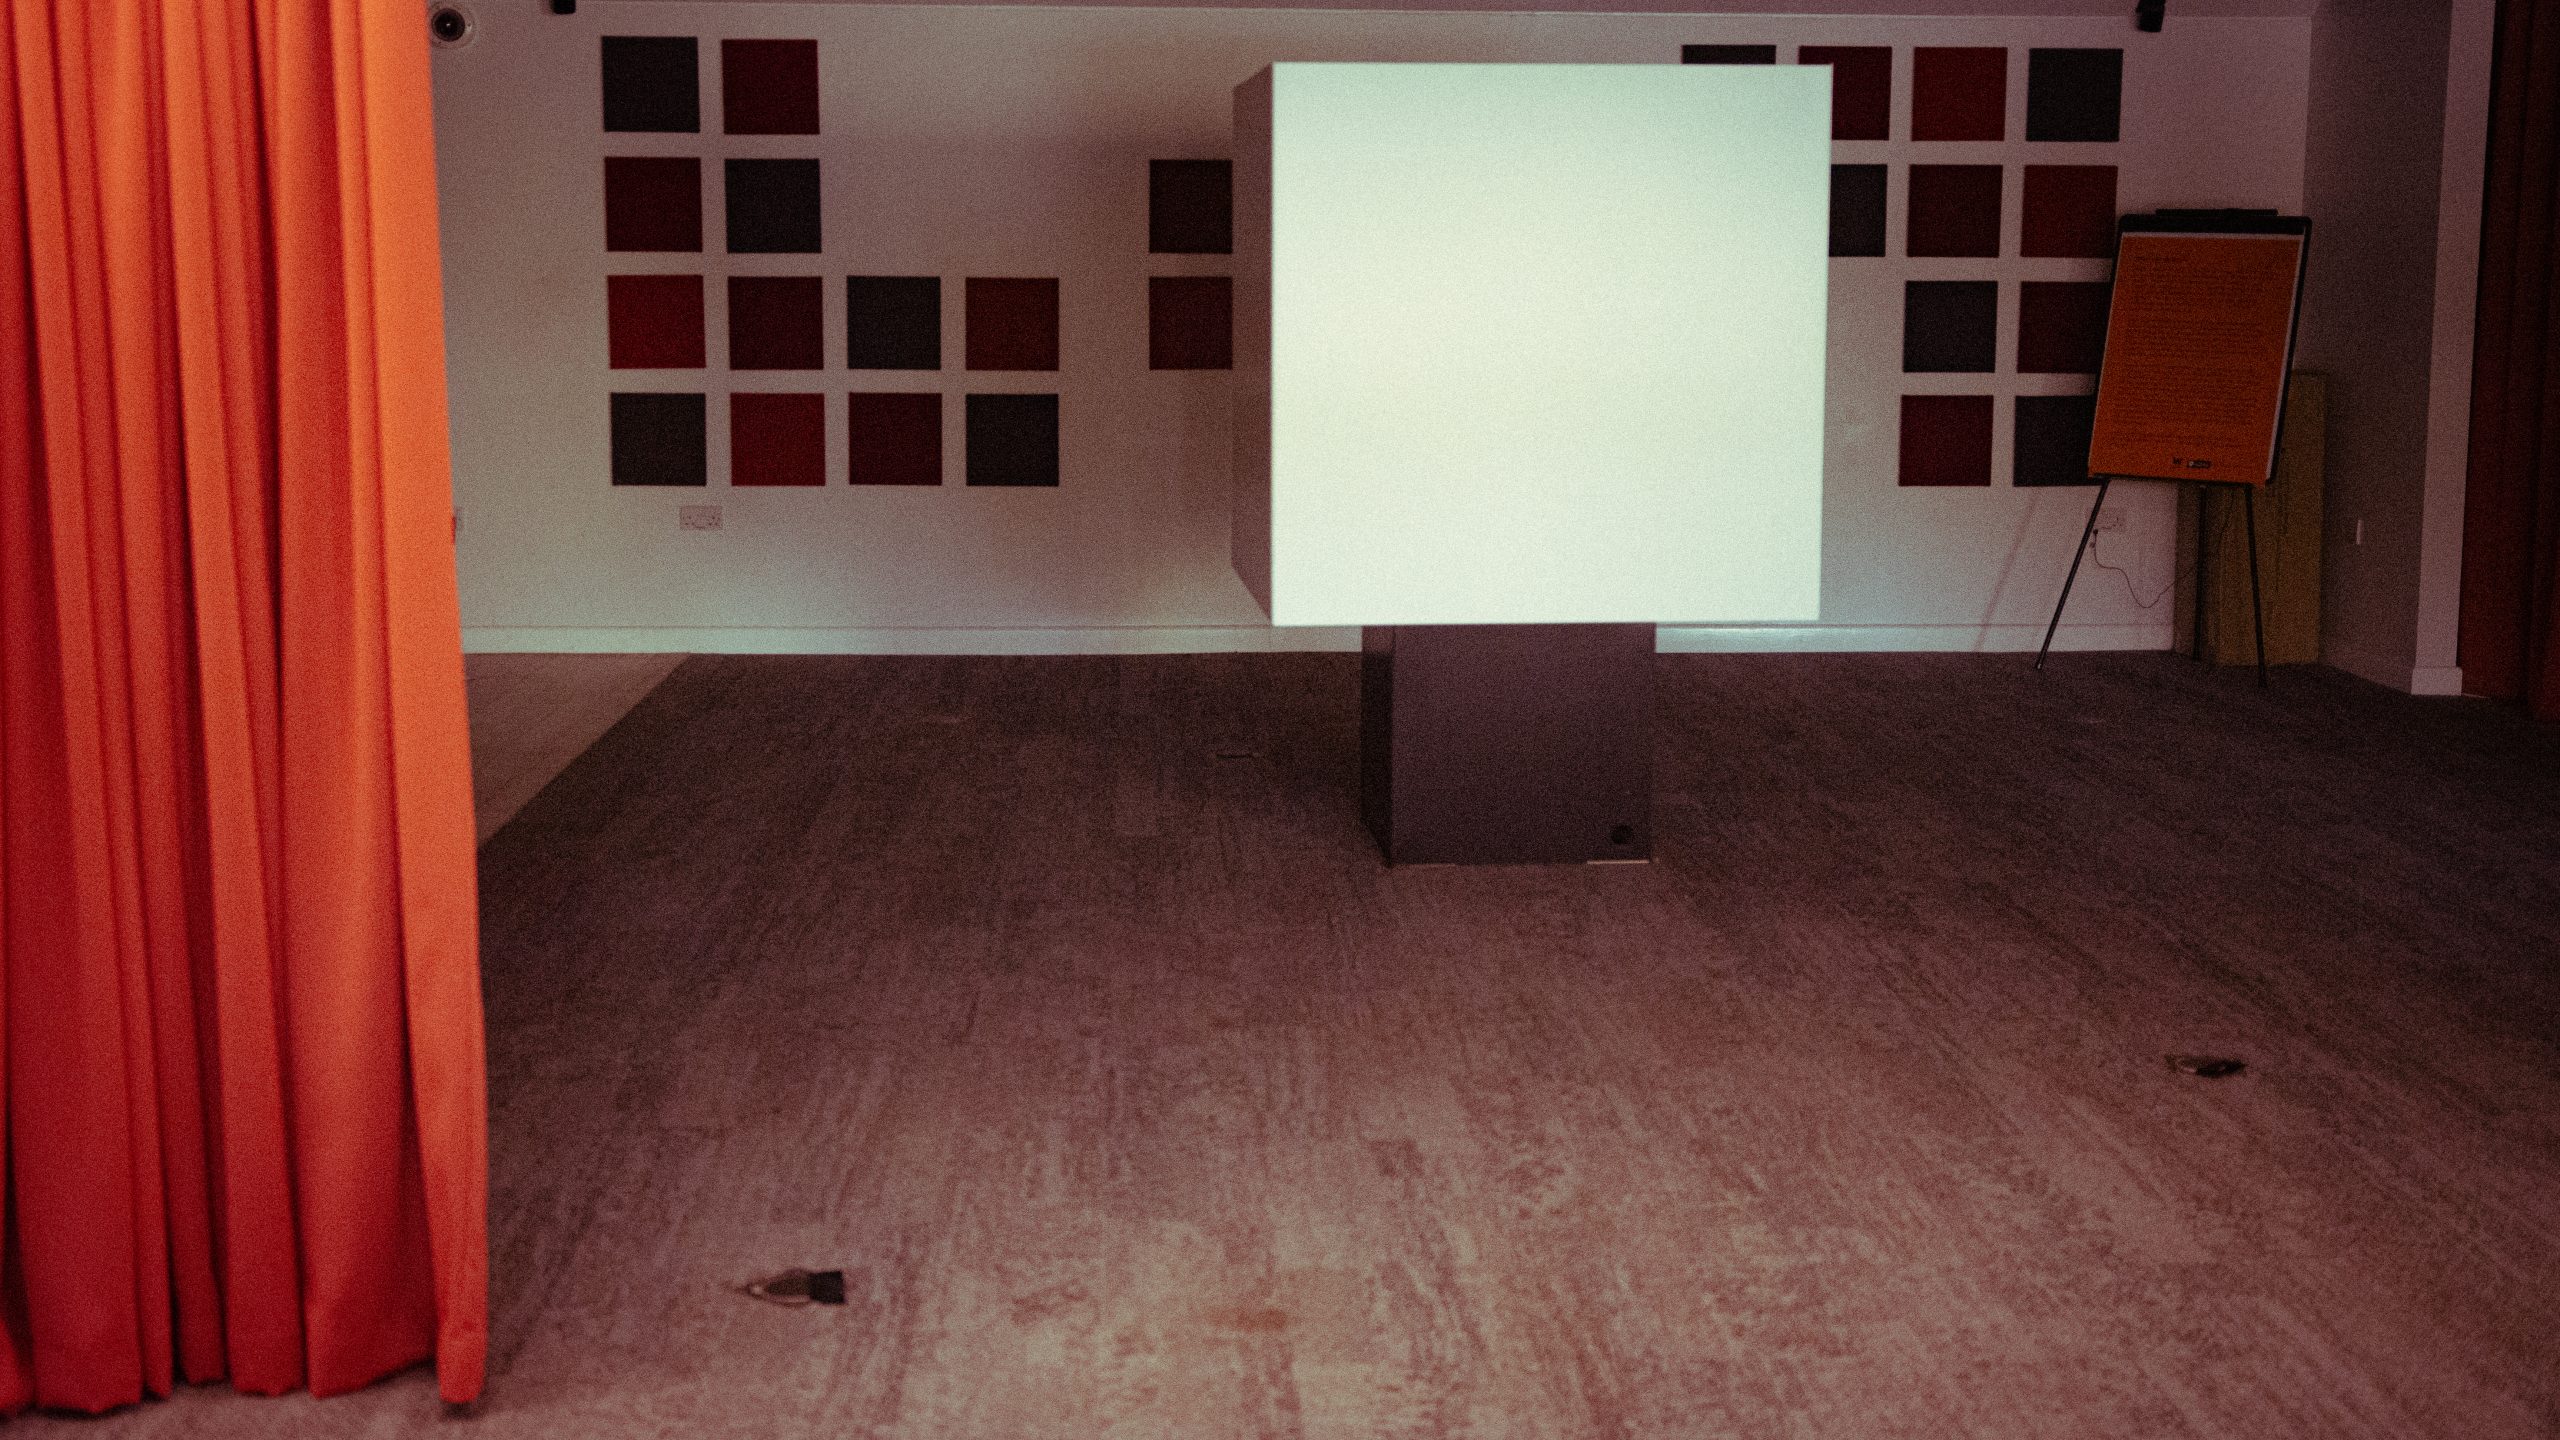 A dark room with an orange curtain to the side. In the middle stands a large white cube on a black stand.